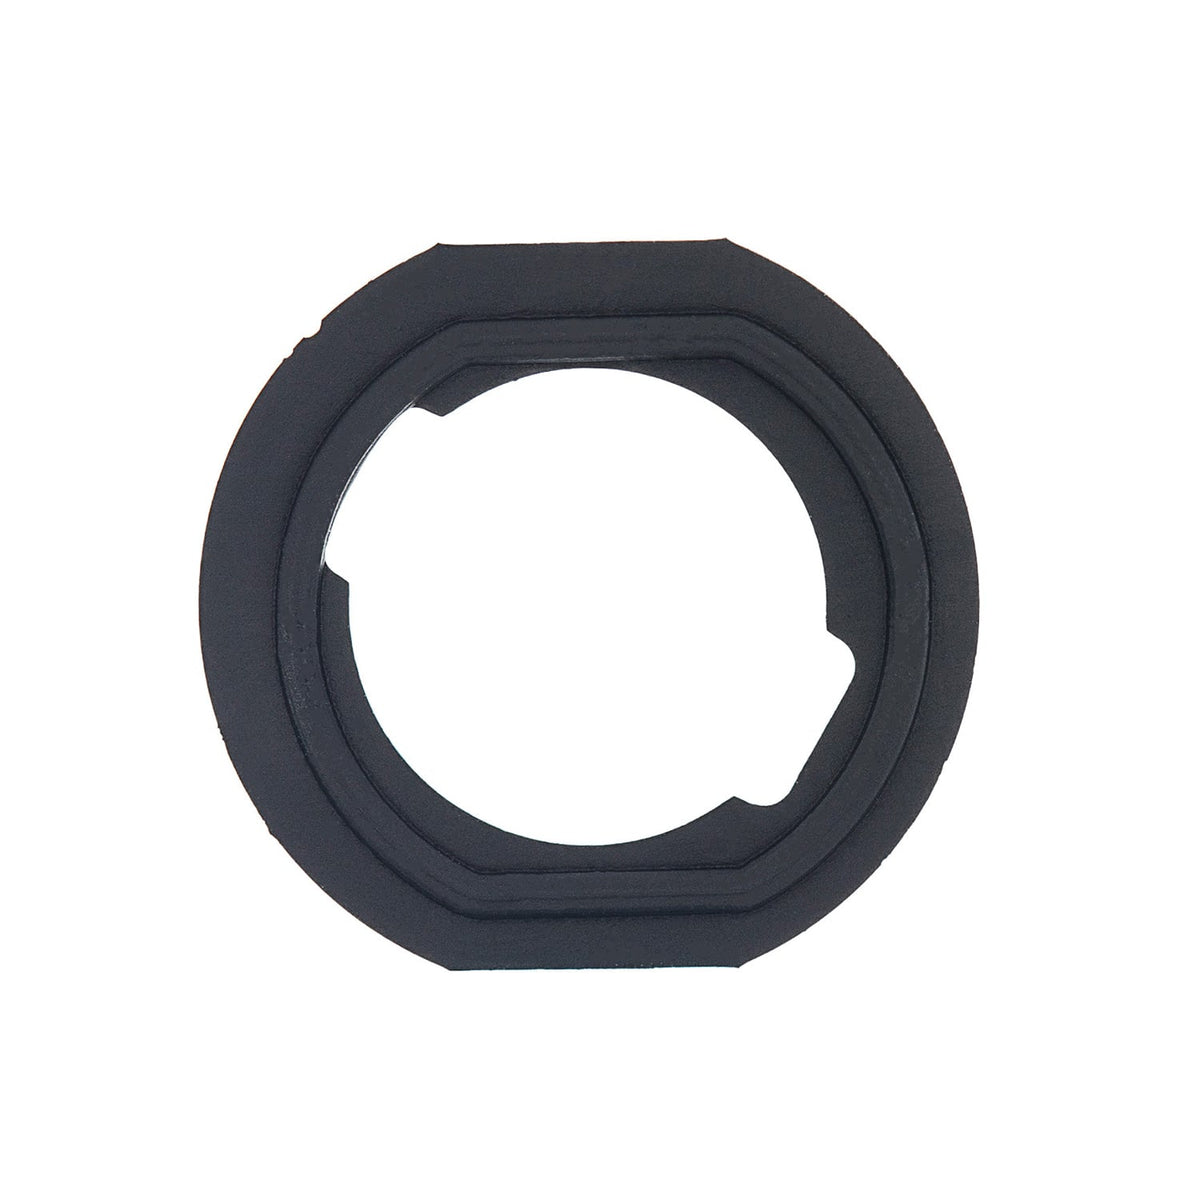 HOME BUTTON RUBBER GASKET REPLACEMENT FOR IPAD 6/7/8/9